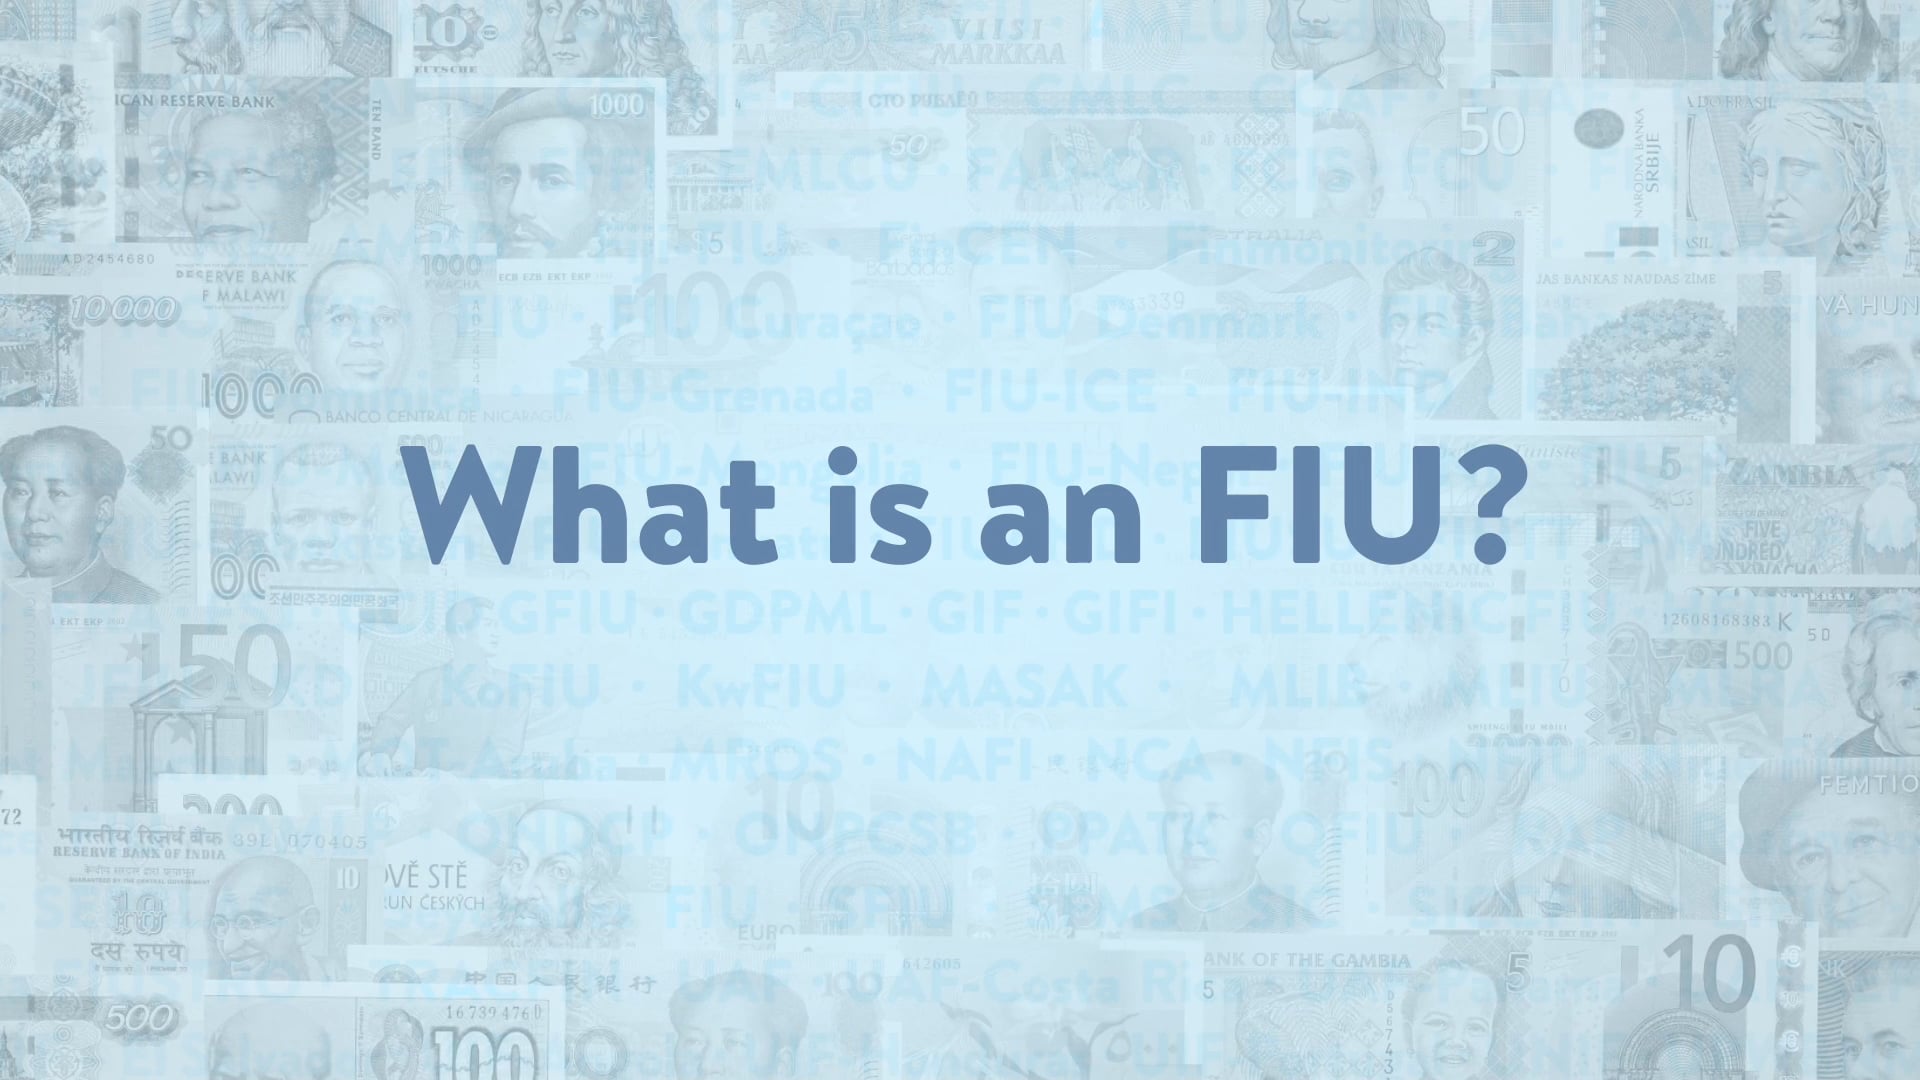 WHAT IS AN FIU?